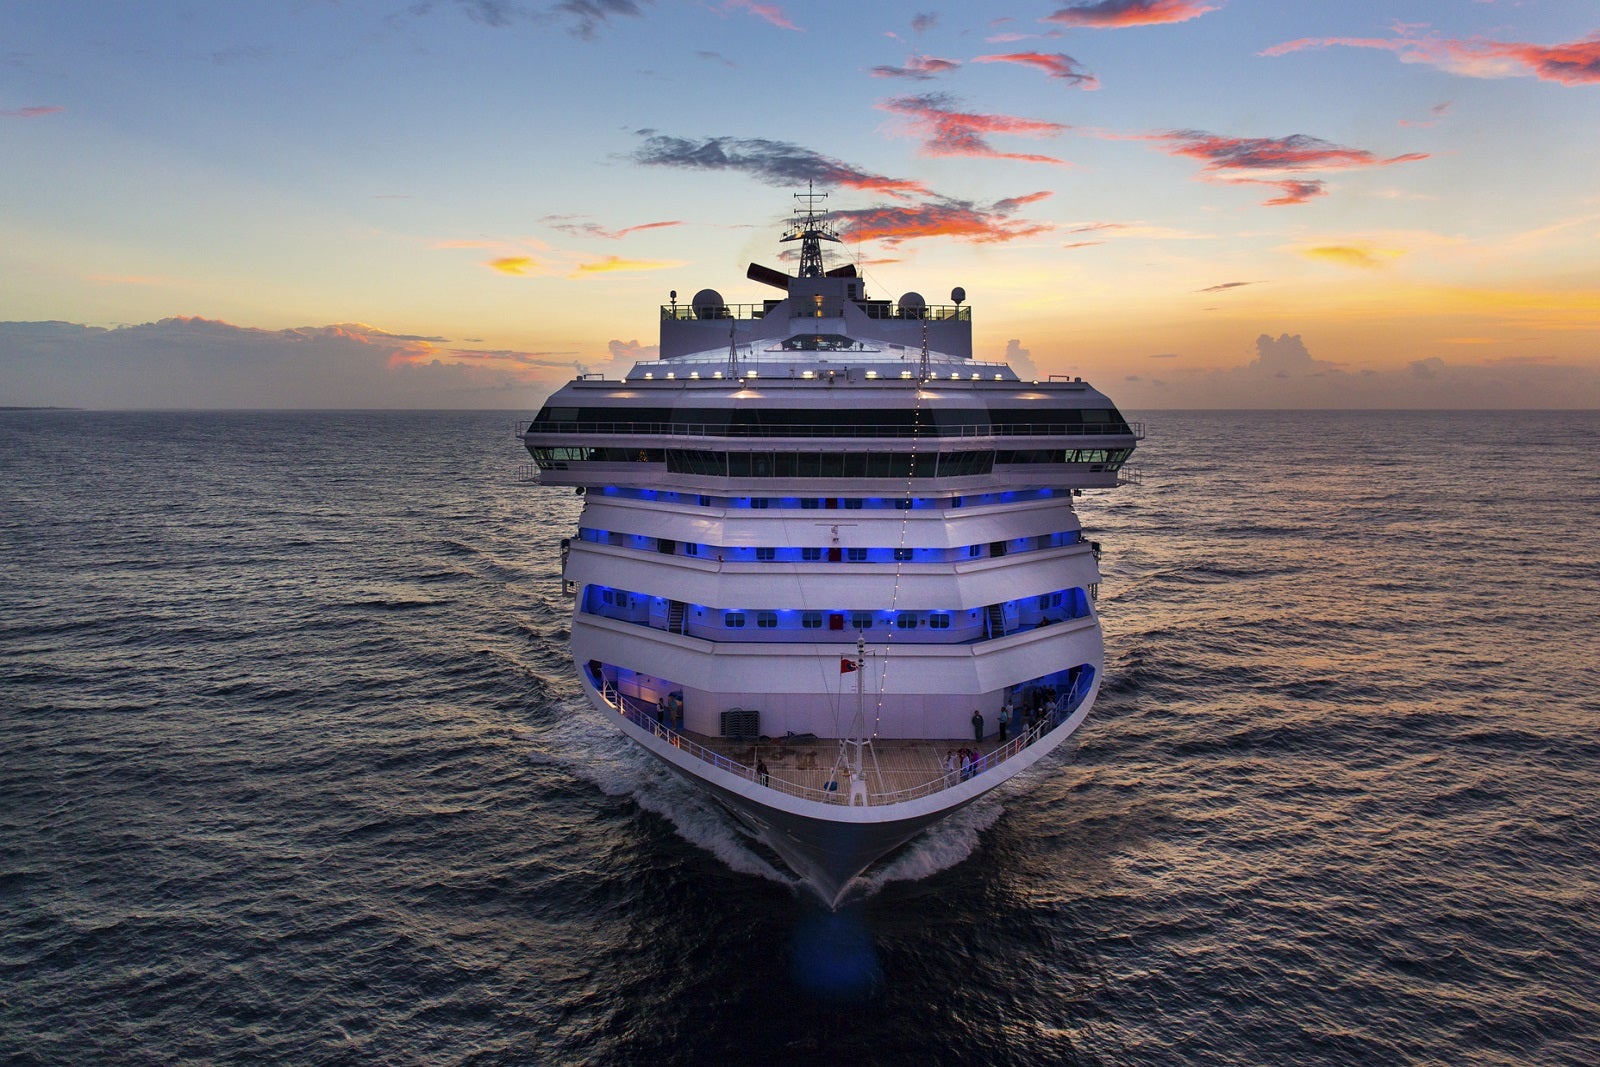 The 8 classes of Carnival Cruise Line ships, explained - The